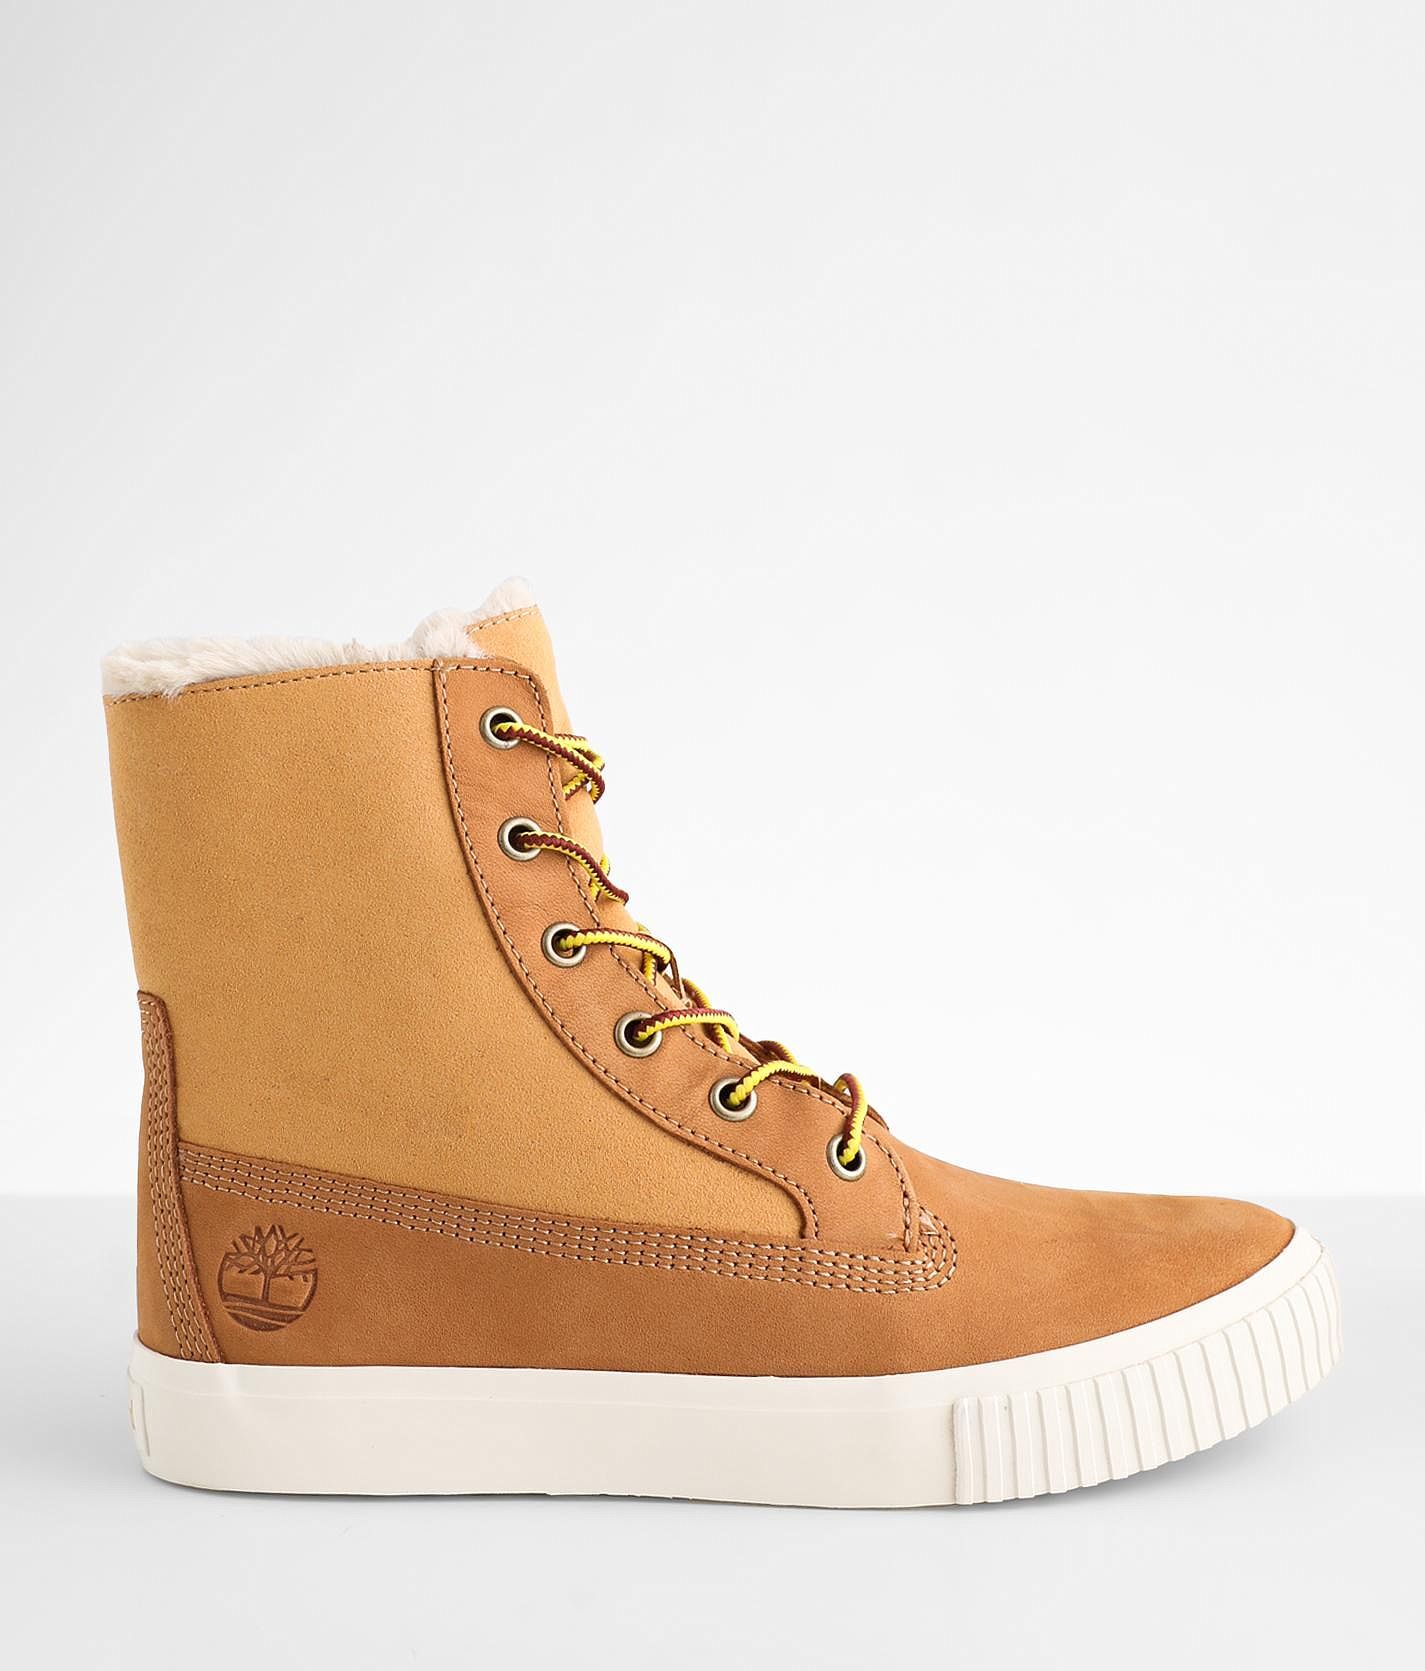 Timberland Skyla Bay Suede Boot  - Brown - female - Size: 6